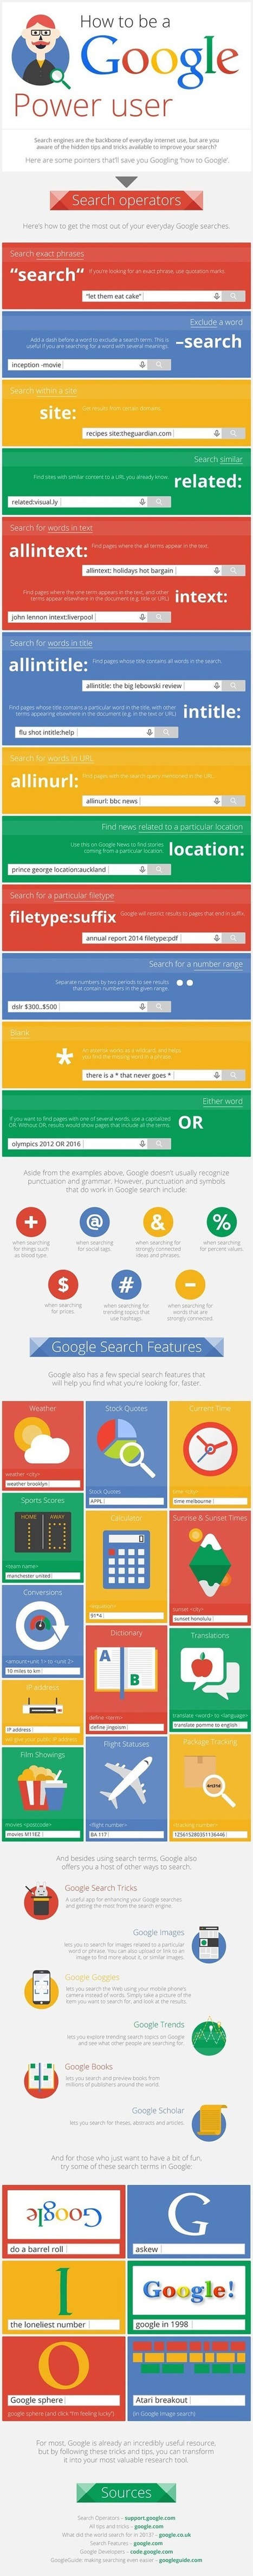 46 Hidden Tips and Tricks to Use Google Search Like a Boss: Infographic | Education Matters - (tech and non-tech) | Scoop.it